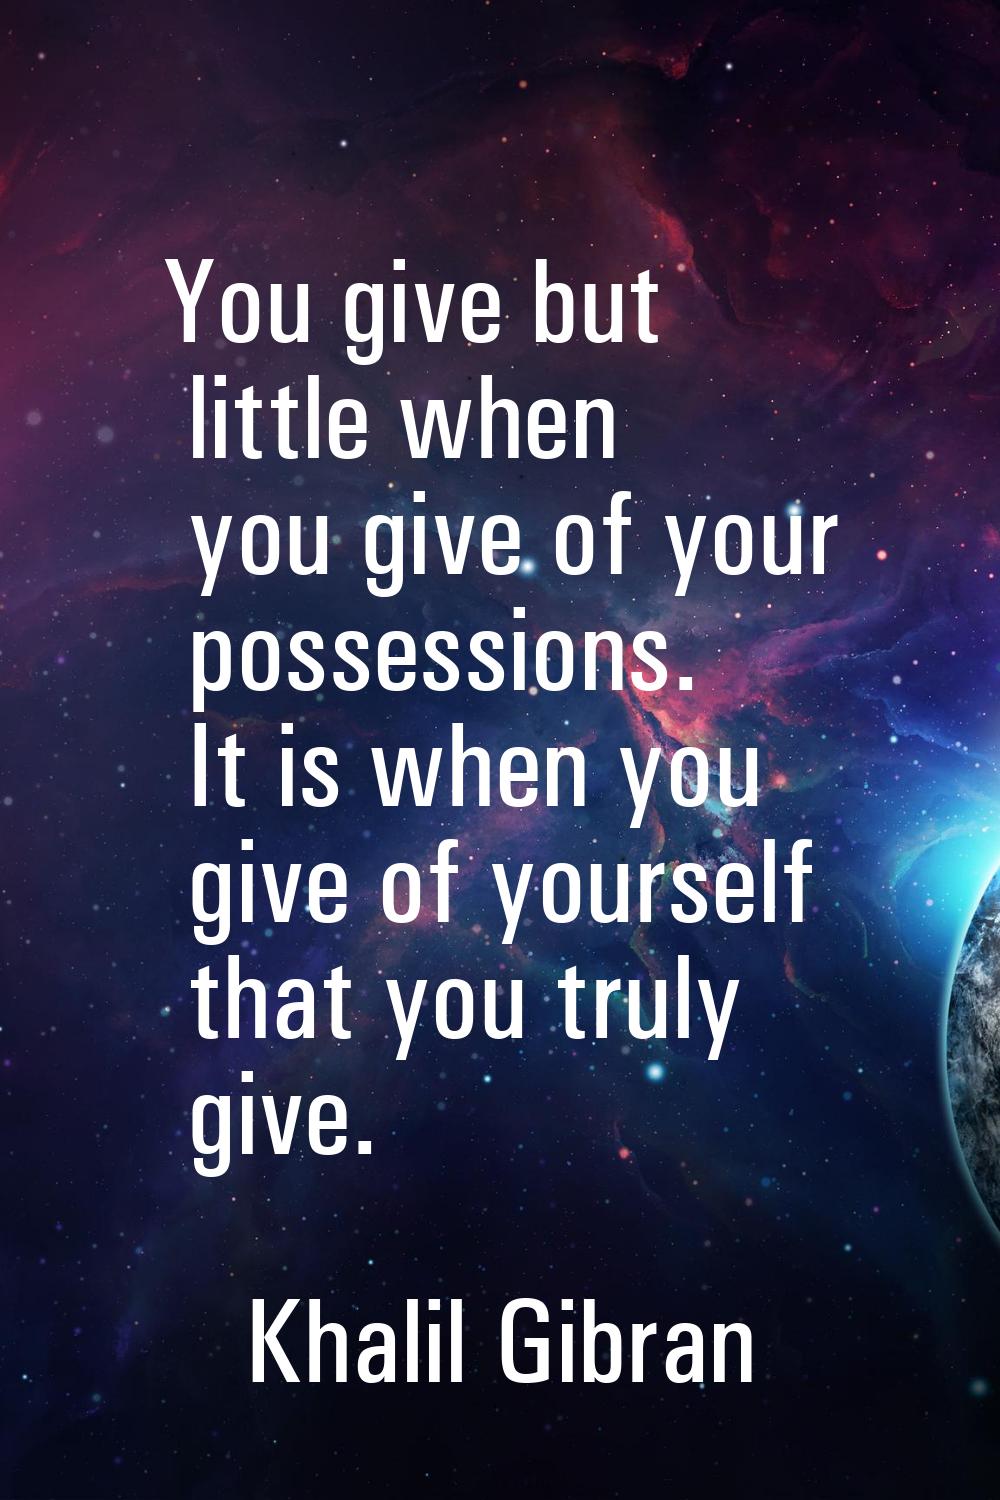 You give but little when you give of your possessions. It is when you give of yourself that you tru